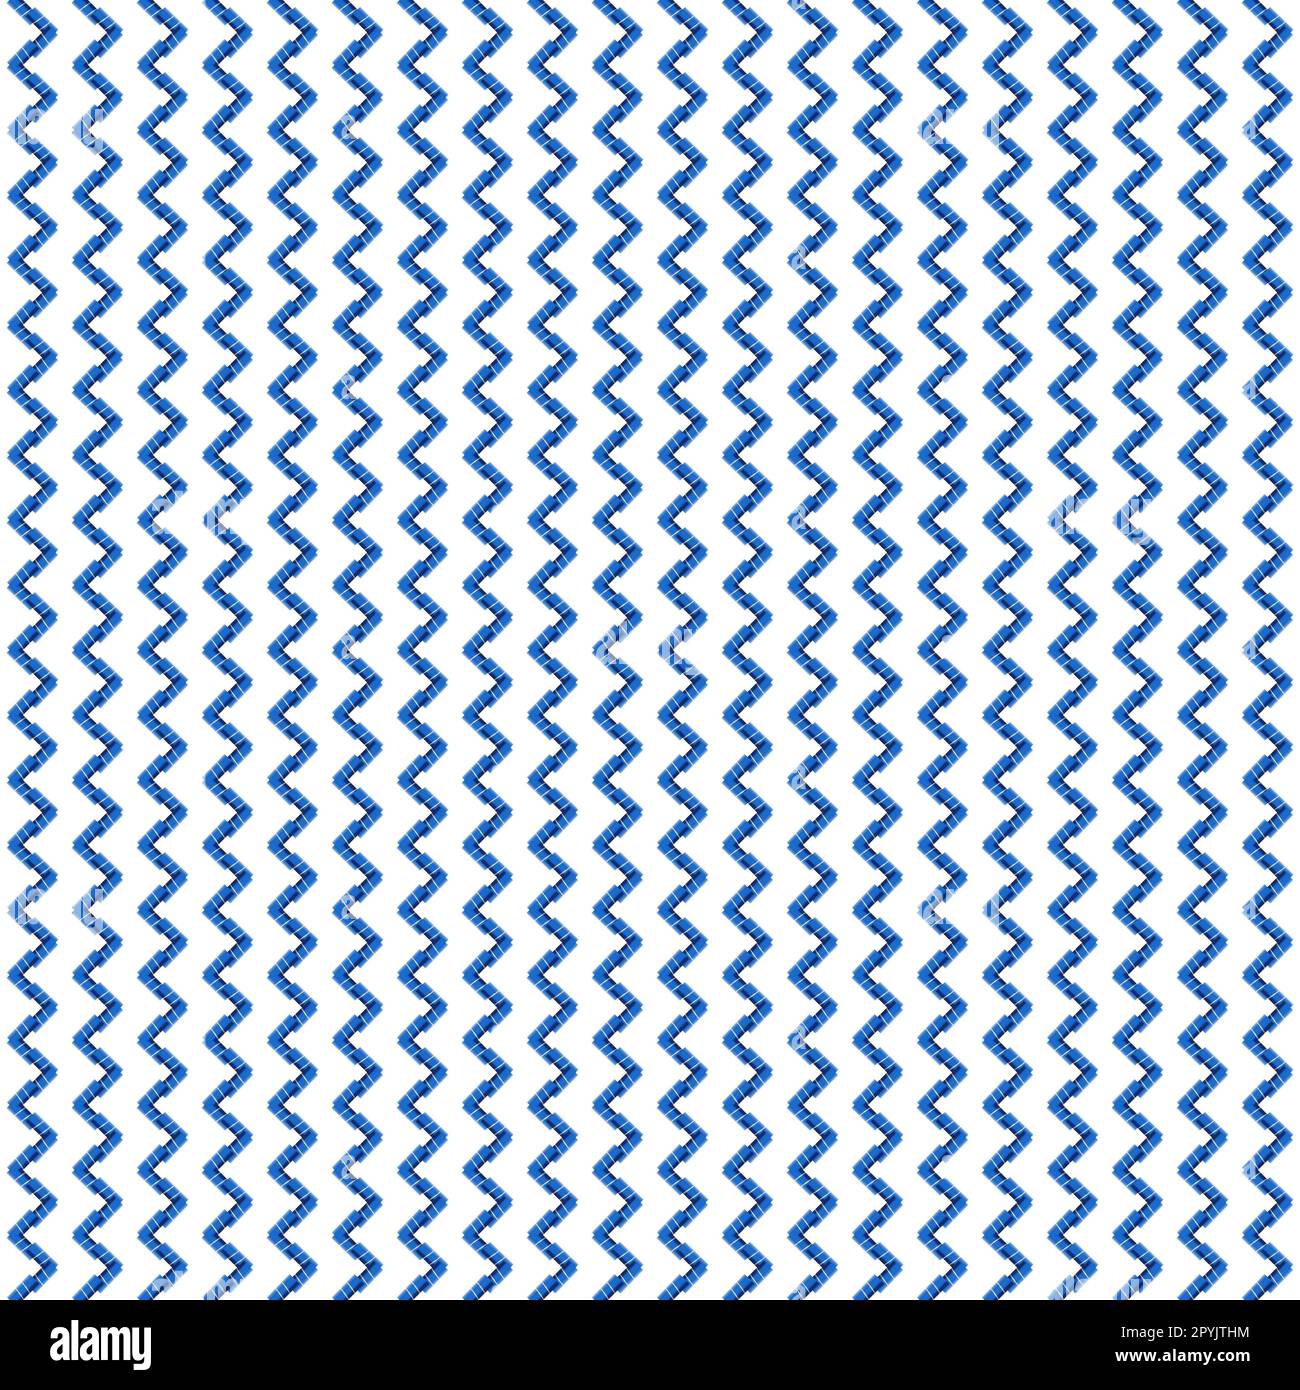 Abstract blue and white seamless pattern Stock Photo